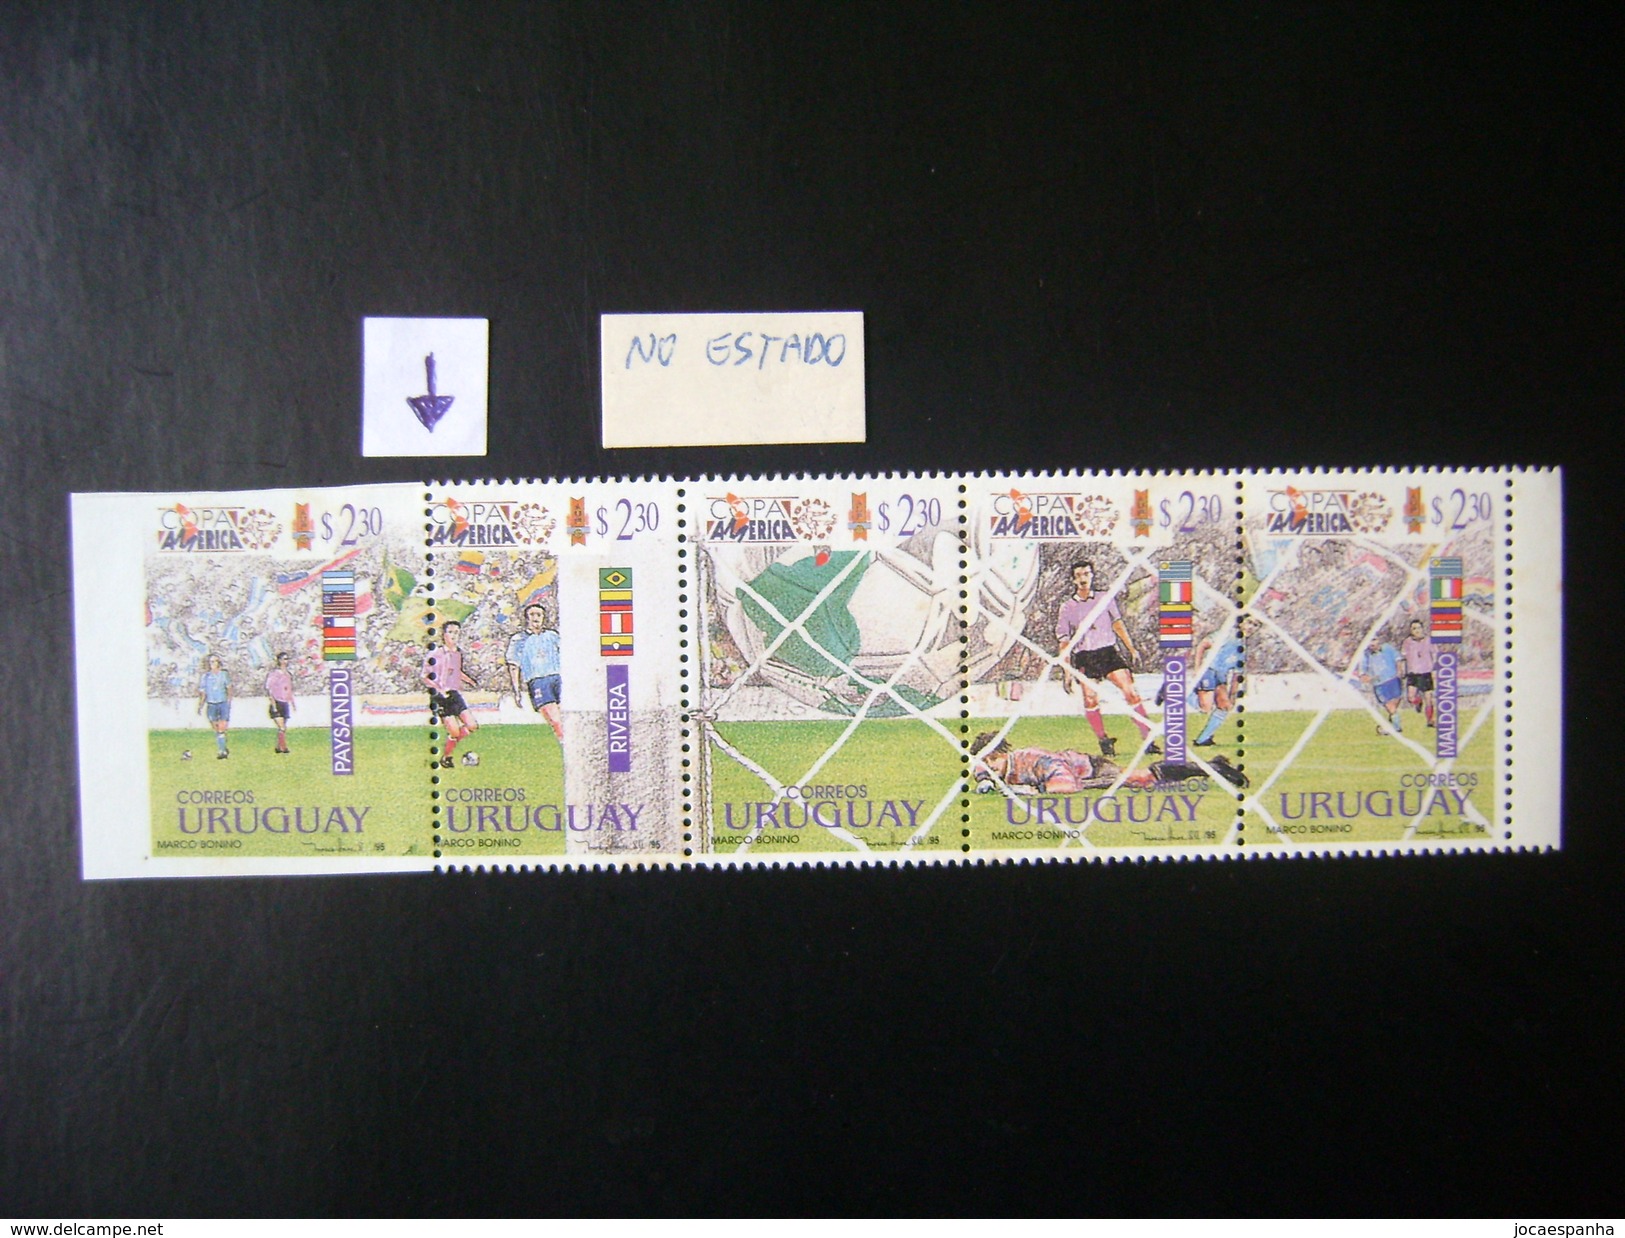 URUGUAY (COPA AMERICA 95) - COMPLETE STRIP WITH PICOTE DISPLACED IN 2 STAMPS - Fußball-Amerikameisterschaft